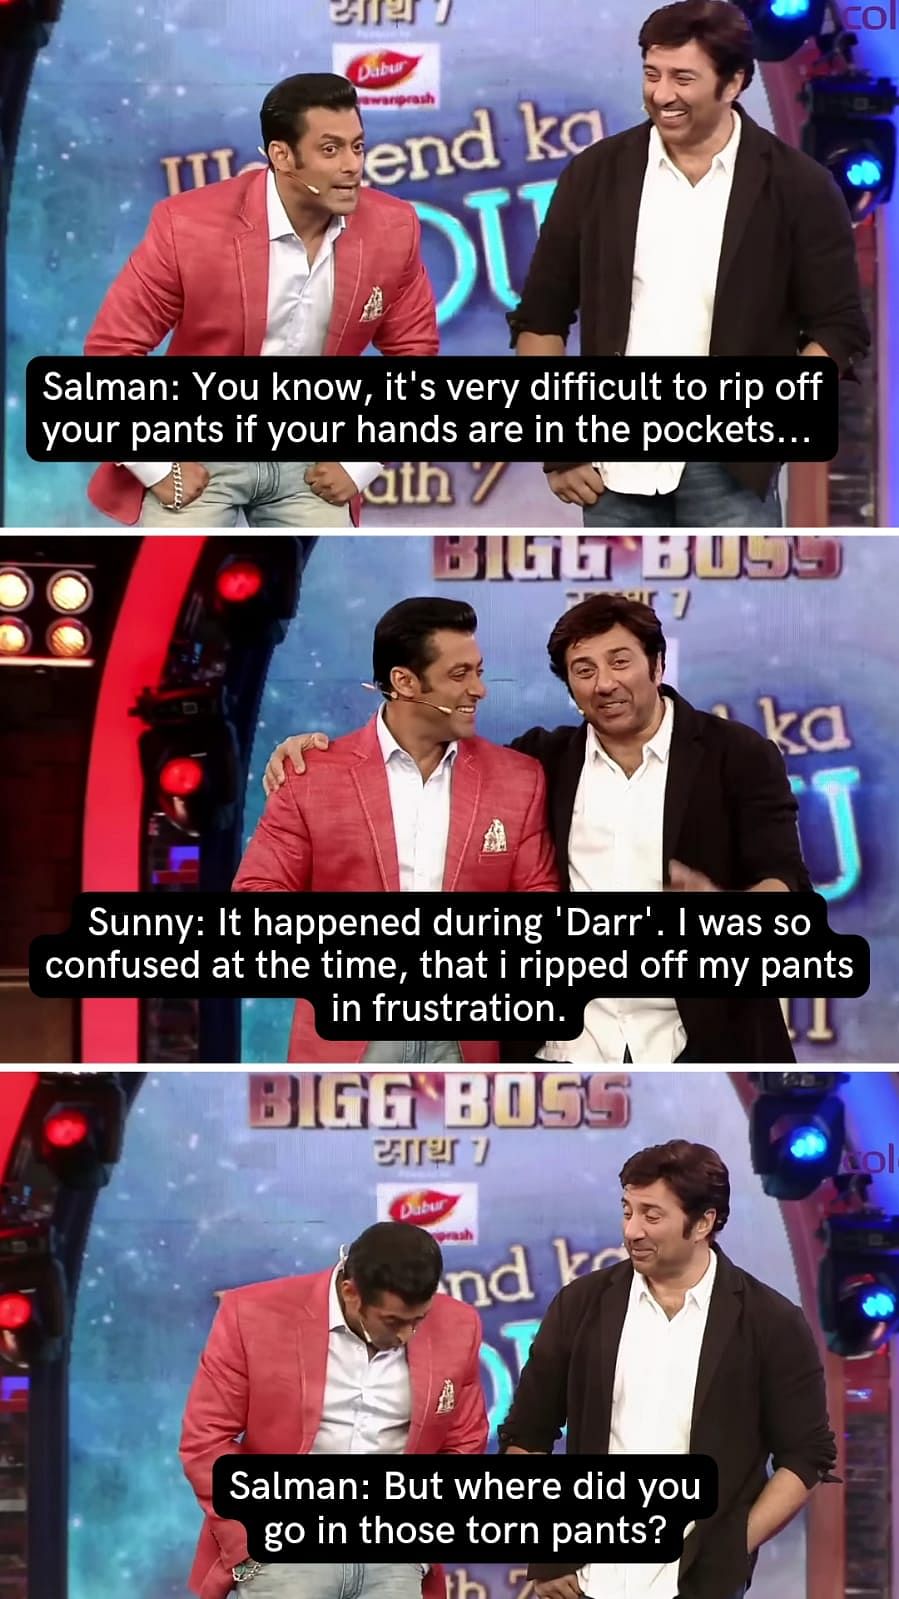 On Salman Khan's 57th birthday, we recall some of his funniest moments from the show.